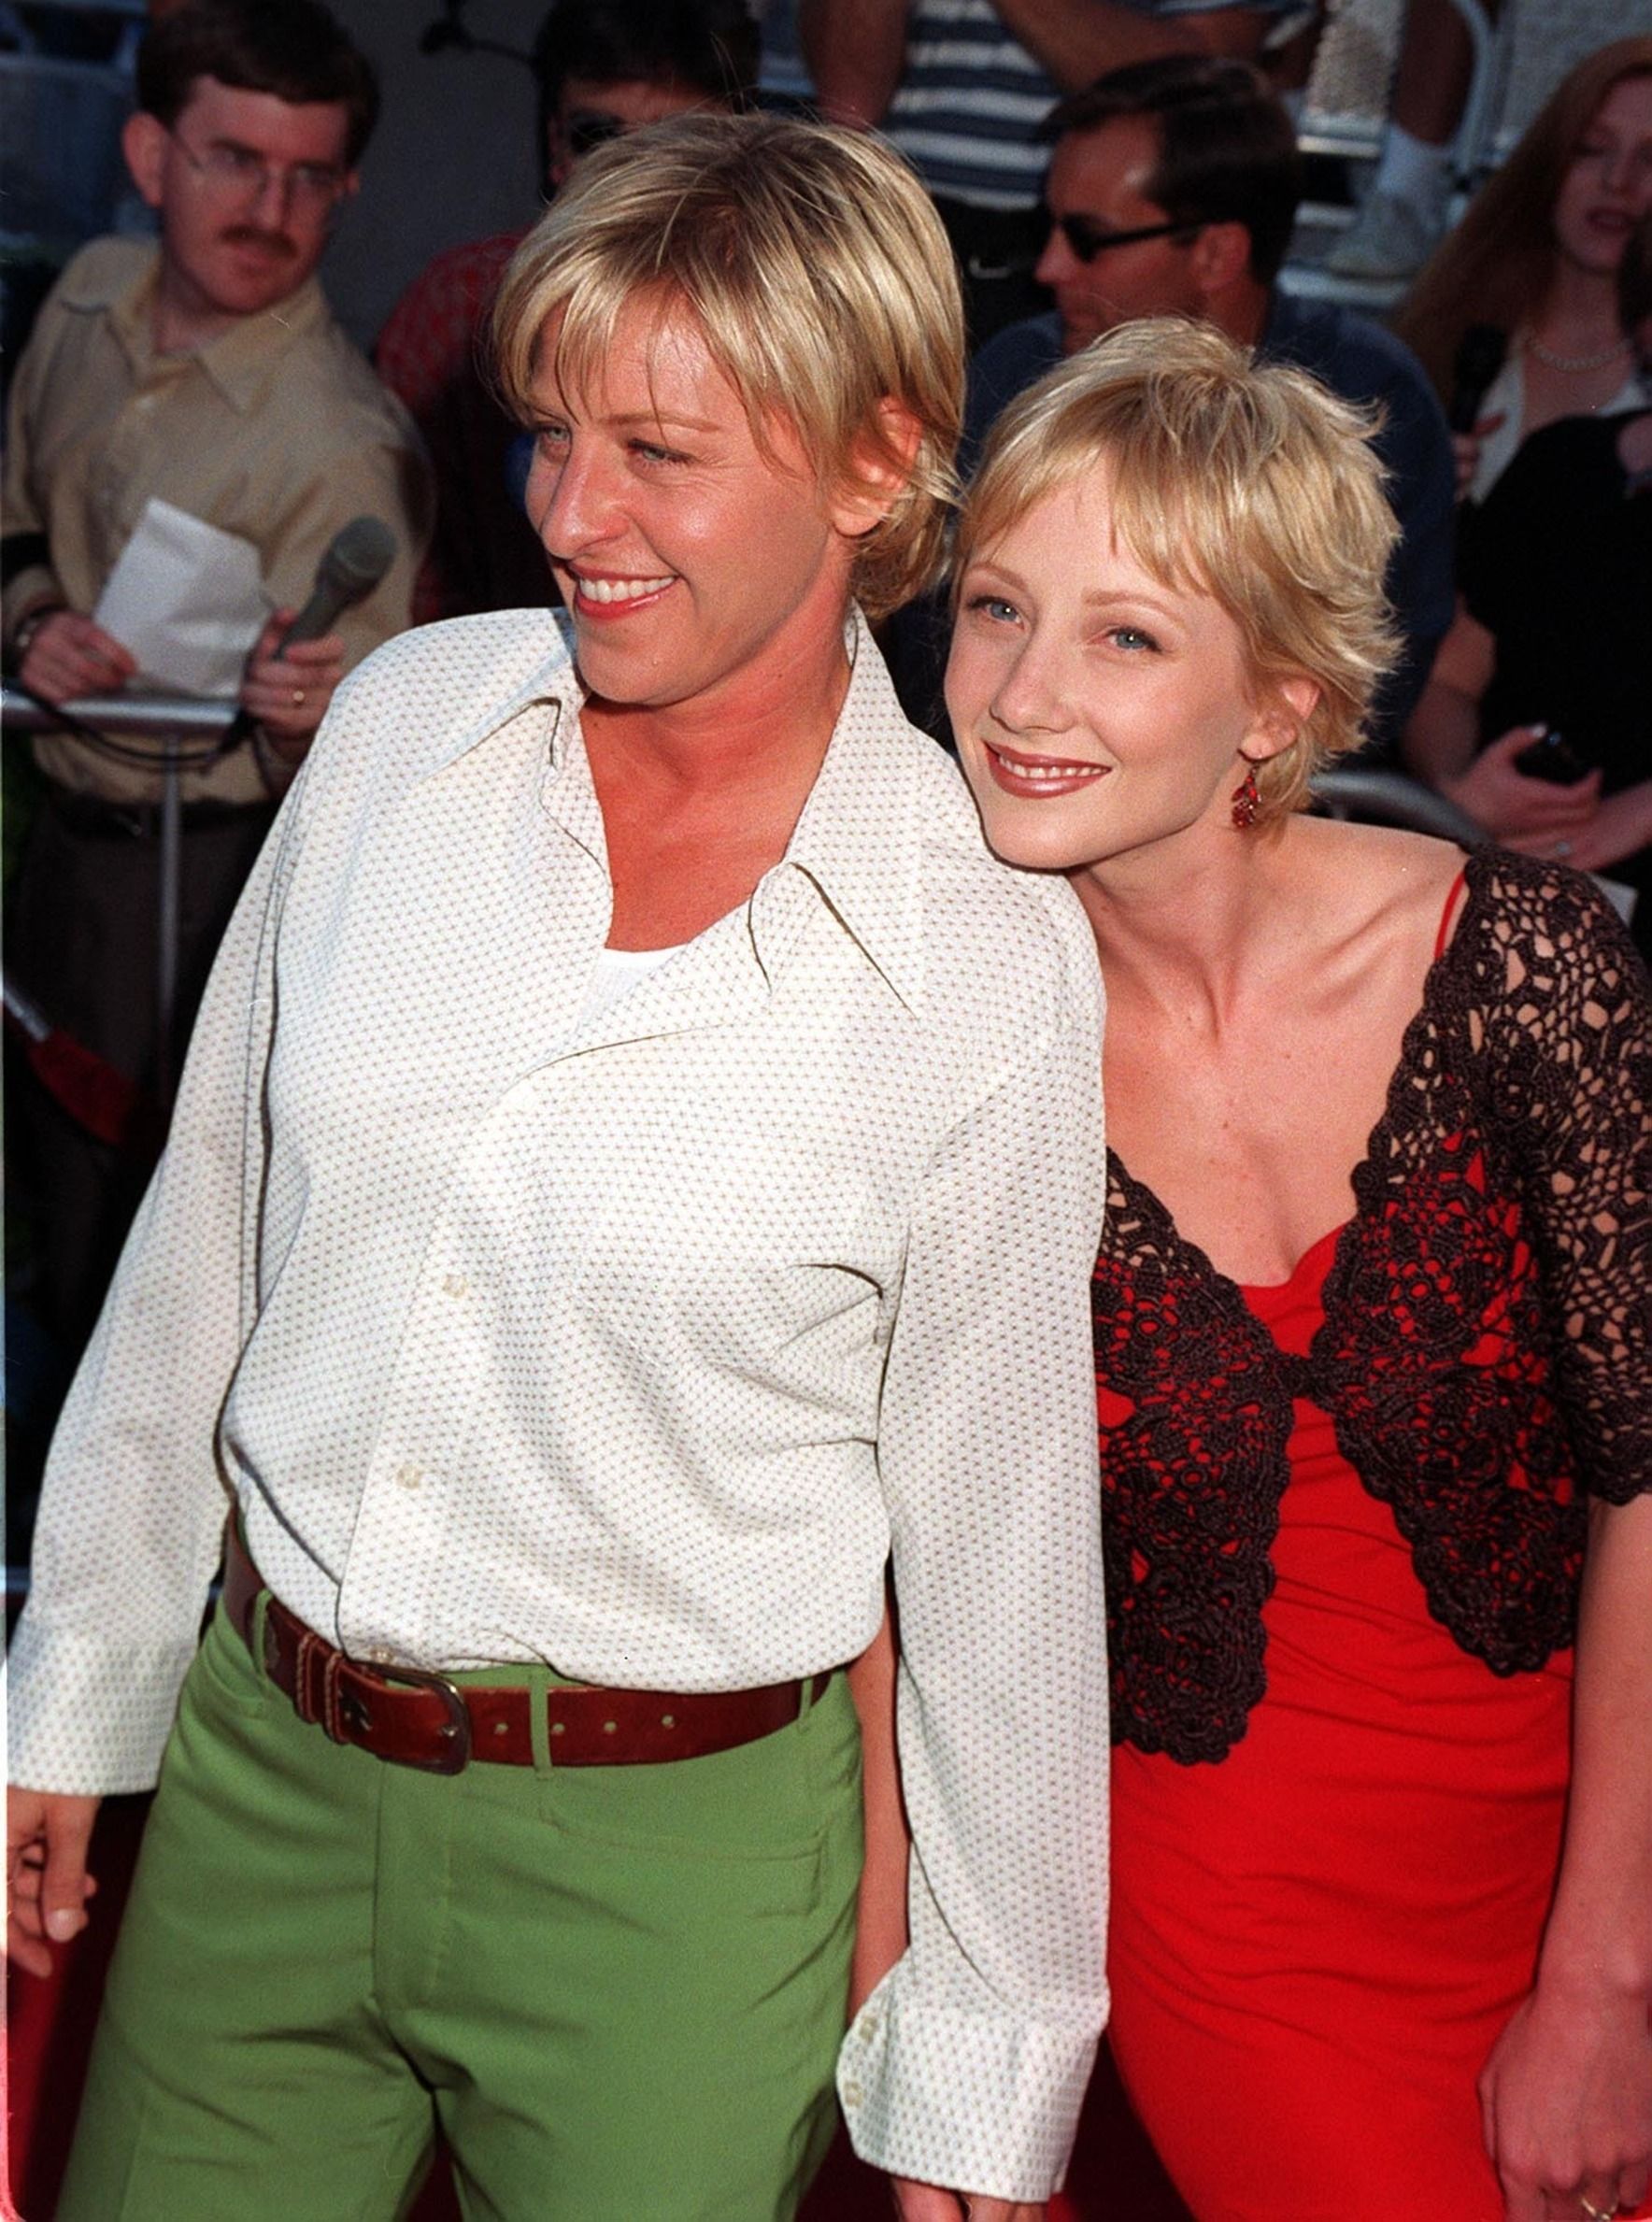 Ellen DeGeneres and Anne Heche at the premiere of "Contact" in 1997| Photo: Getty Images